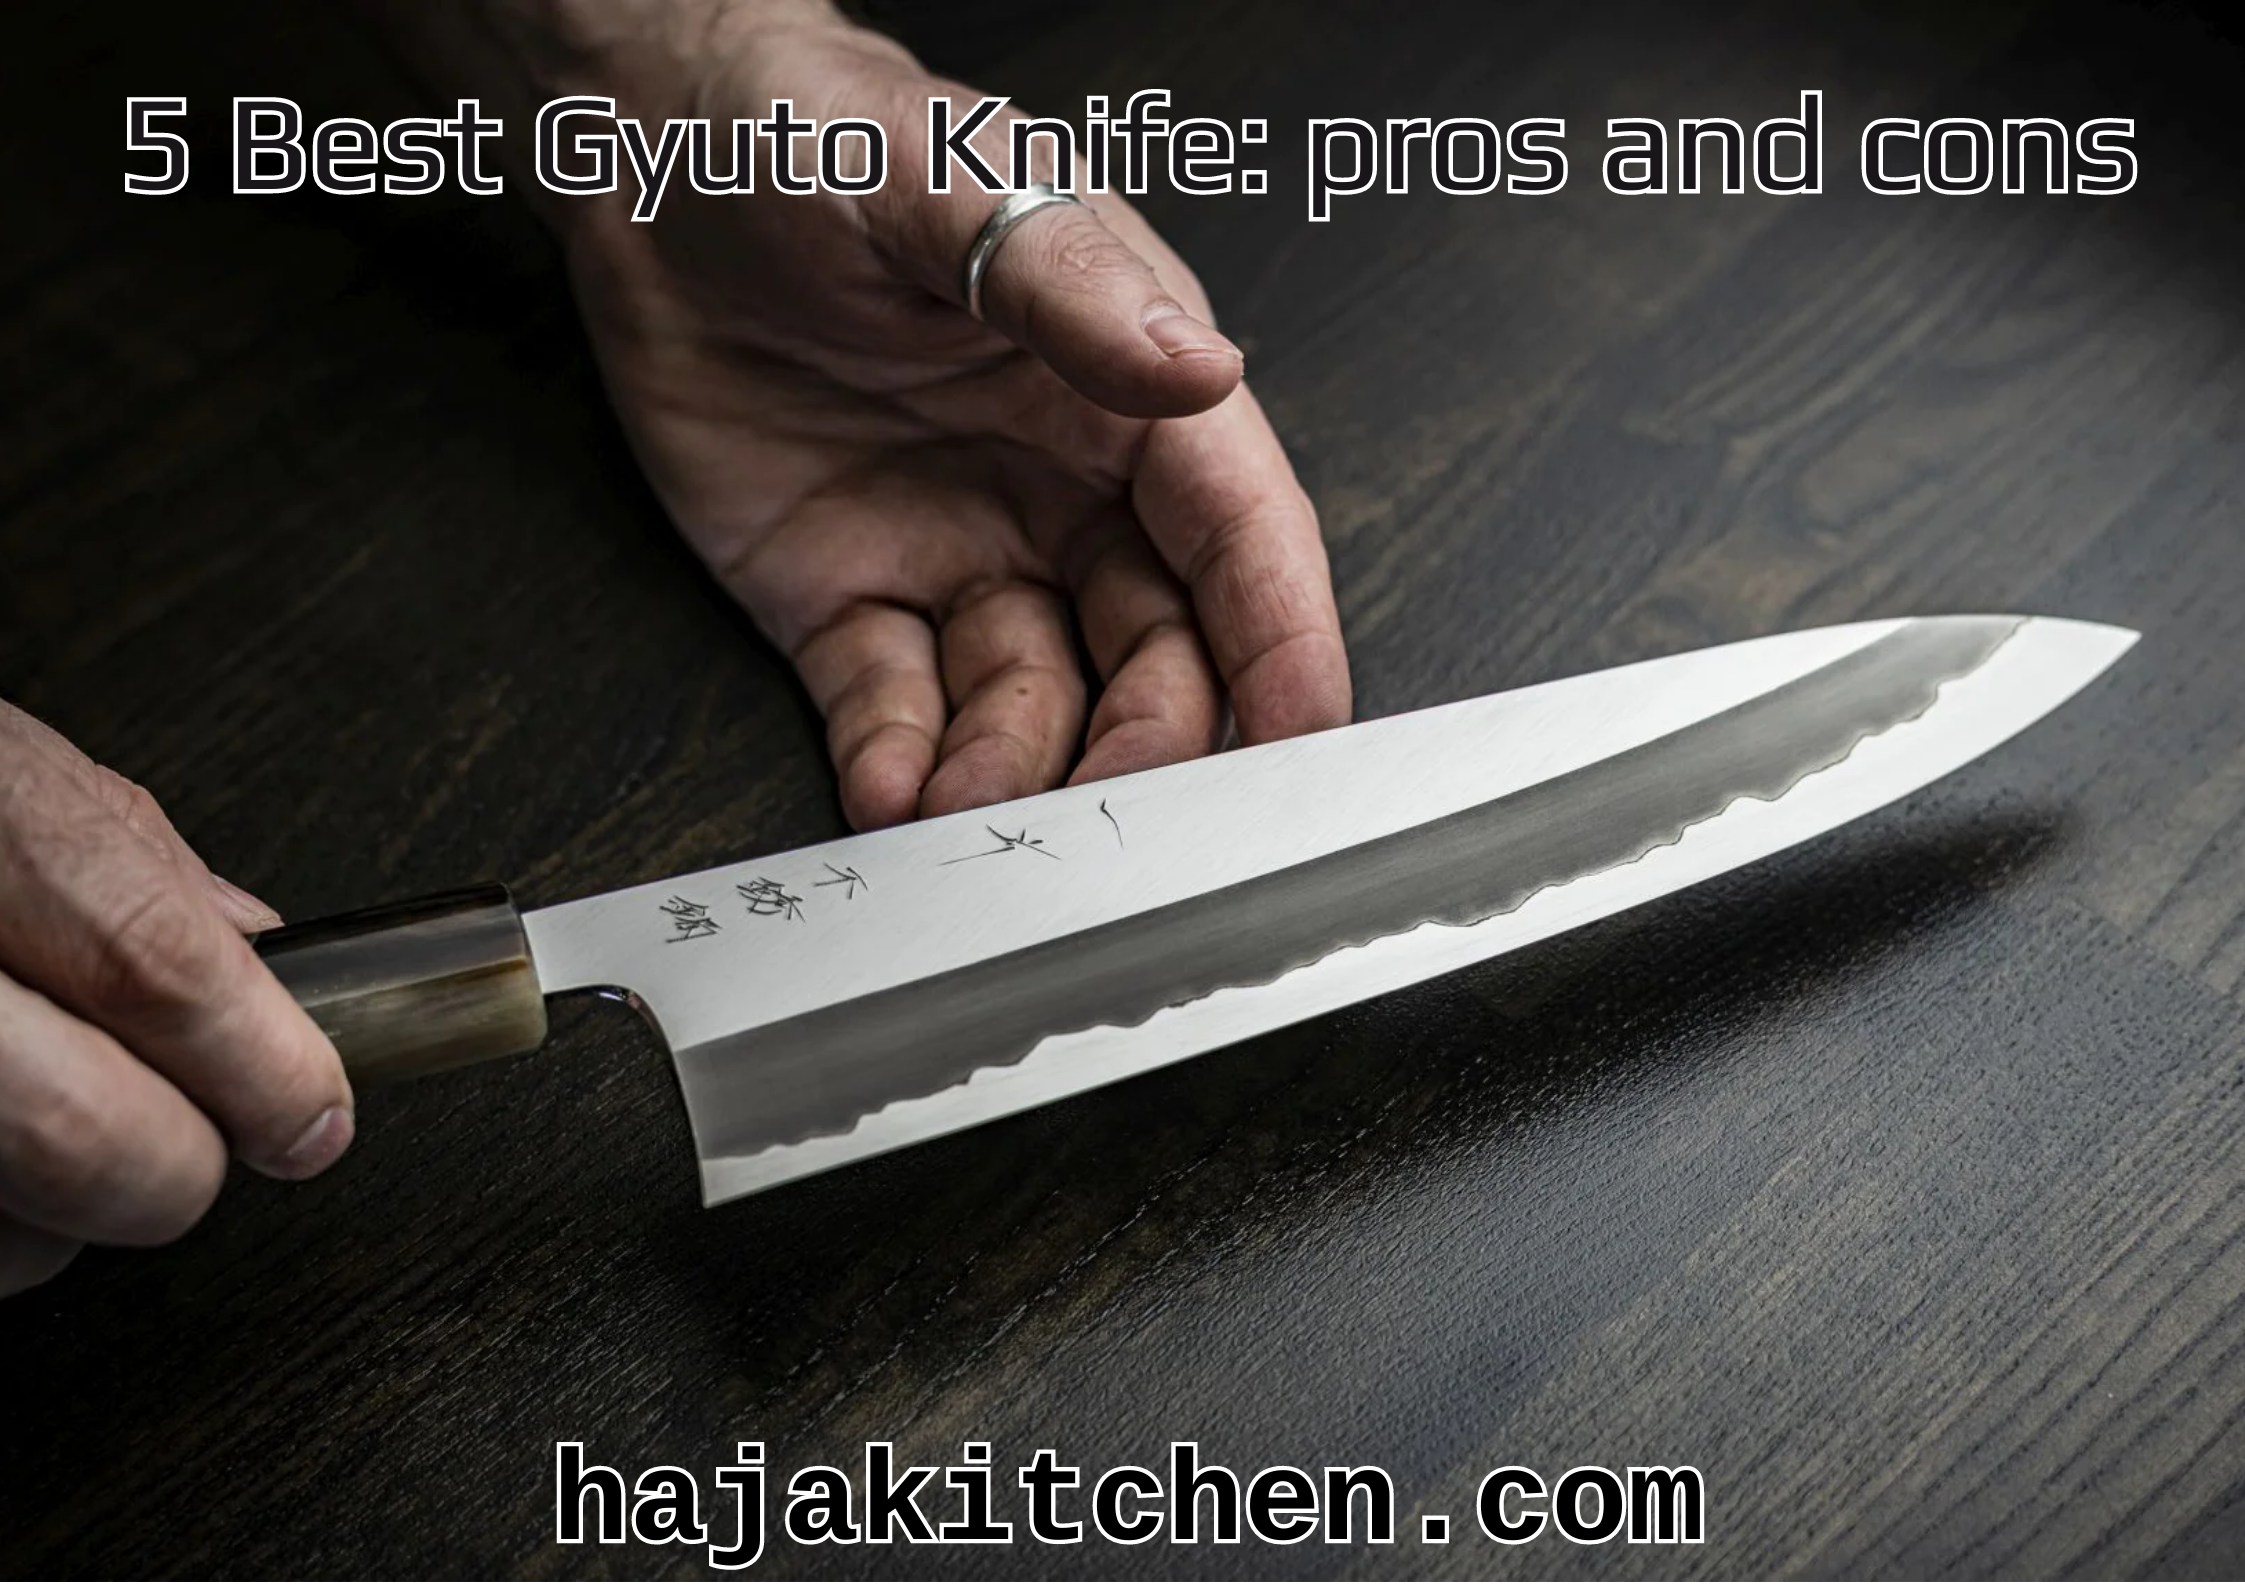 5 Best Gyuto Knife pros and cons